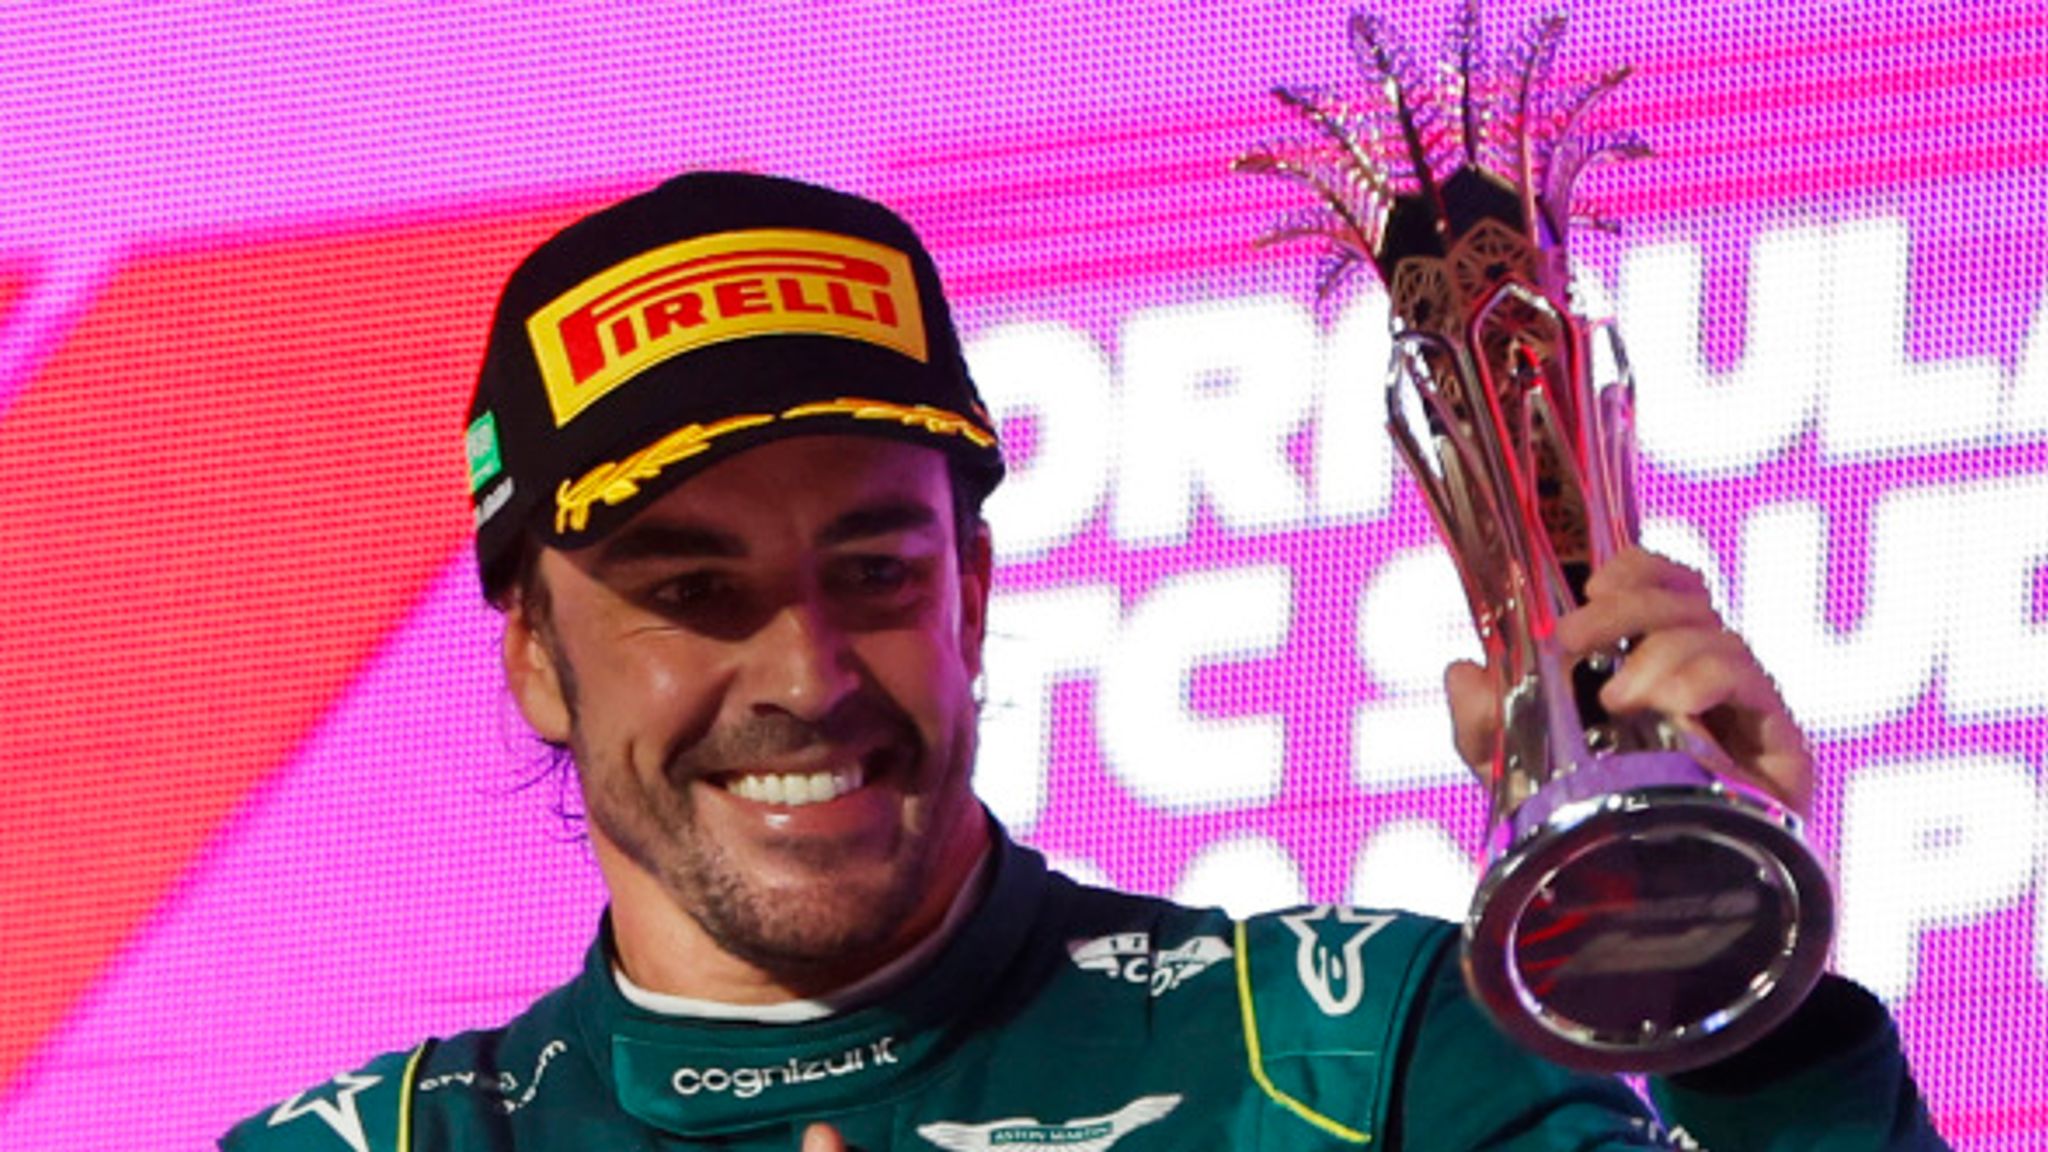 F1 News: Fernando Alonso's Aston Martin Podium Finish Just Made Lawrence  Stroll A Lot Of Money - F1 Briefings: Formula 1 News, Rumors, Standings and  More